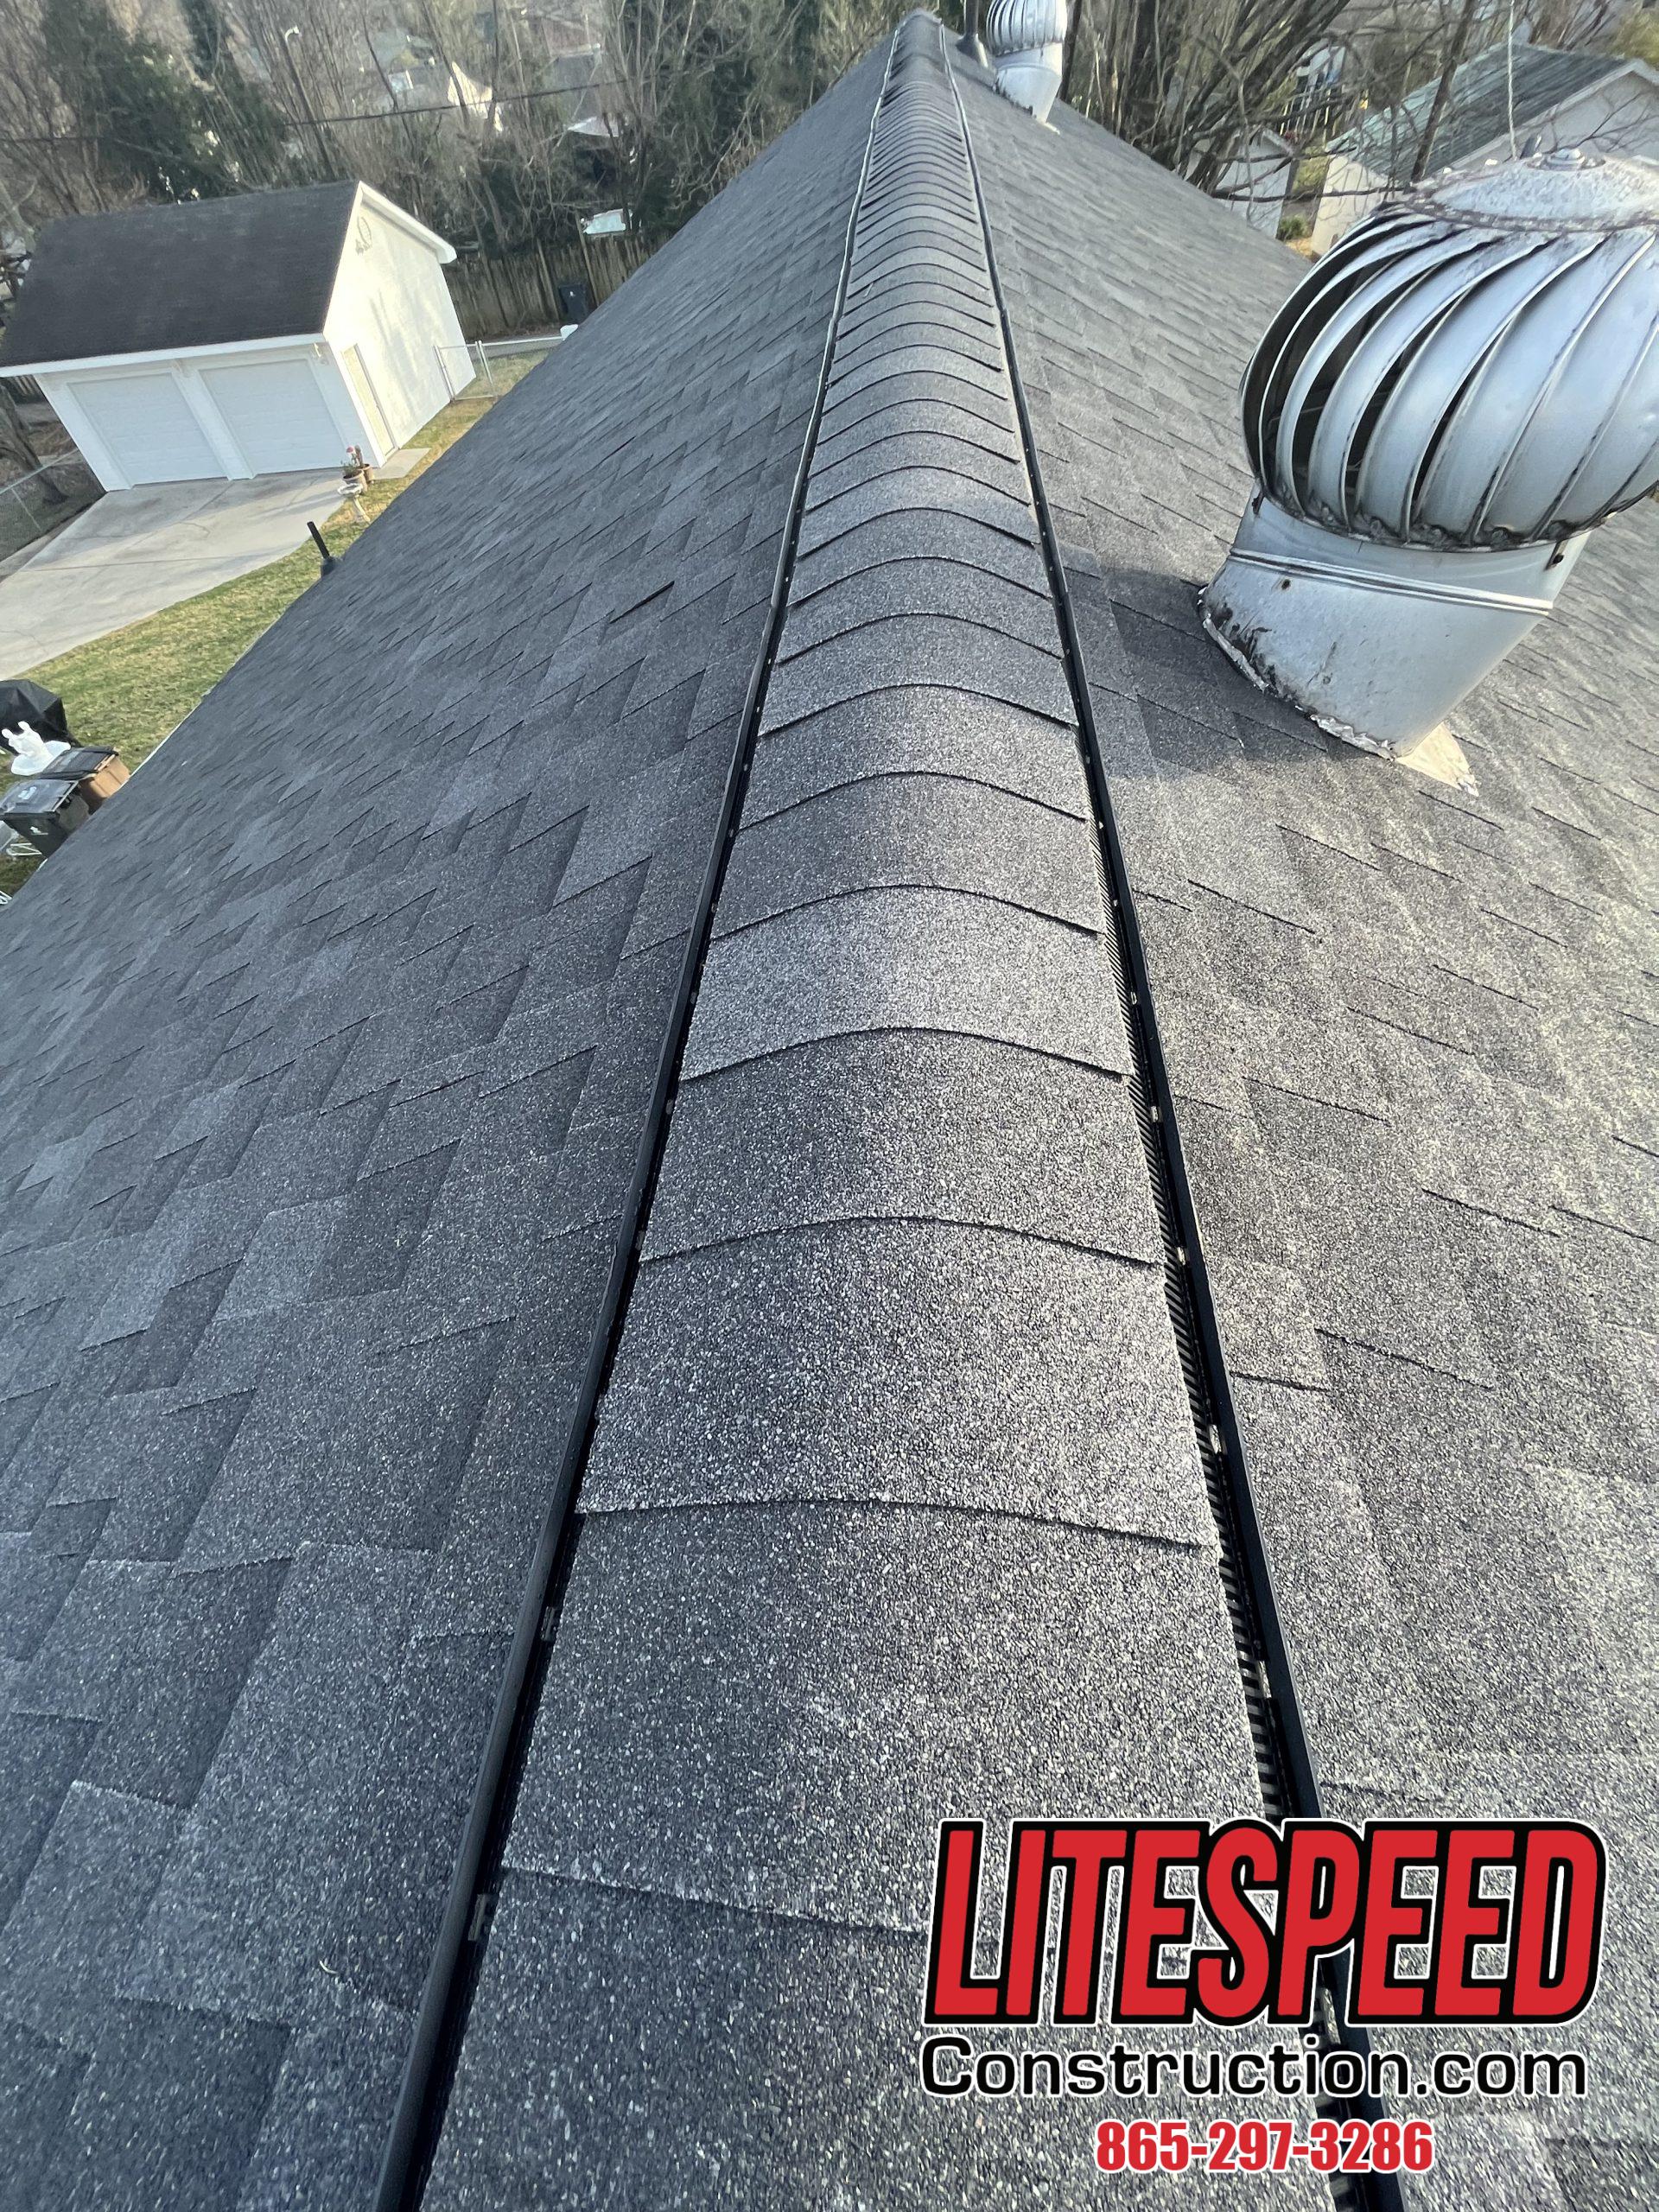 This is a picture of a ridge vent with black shingles